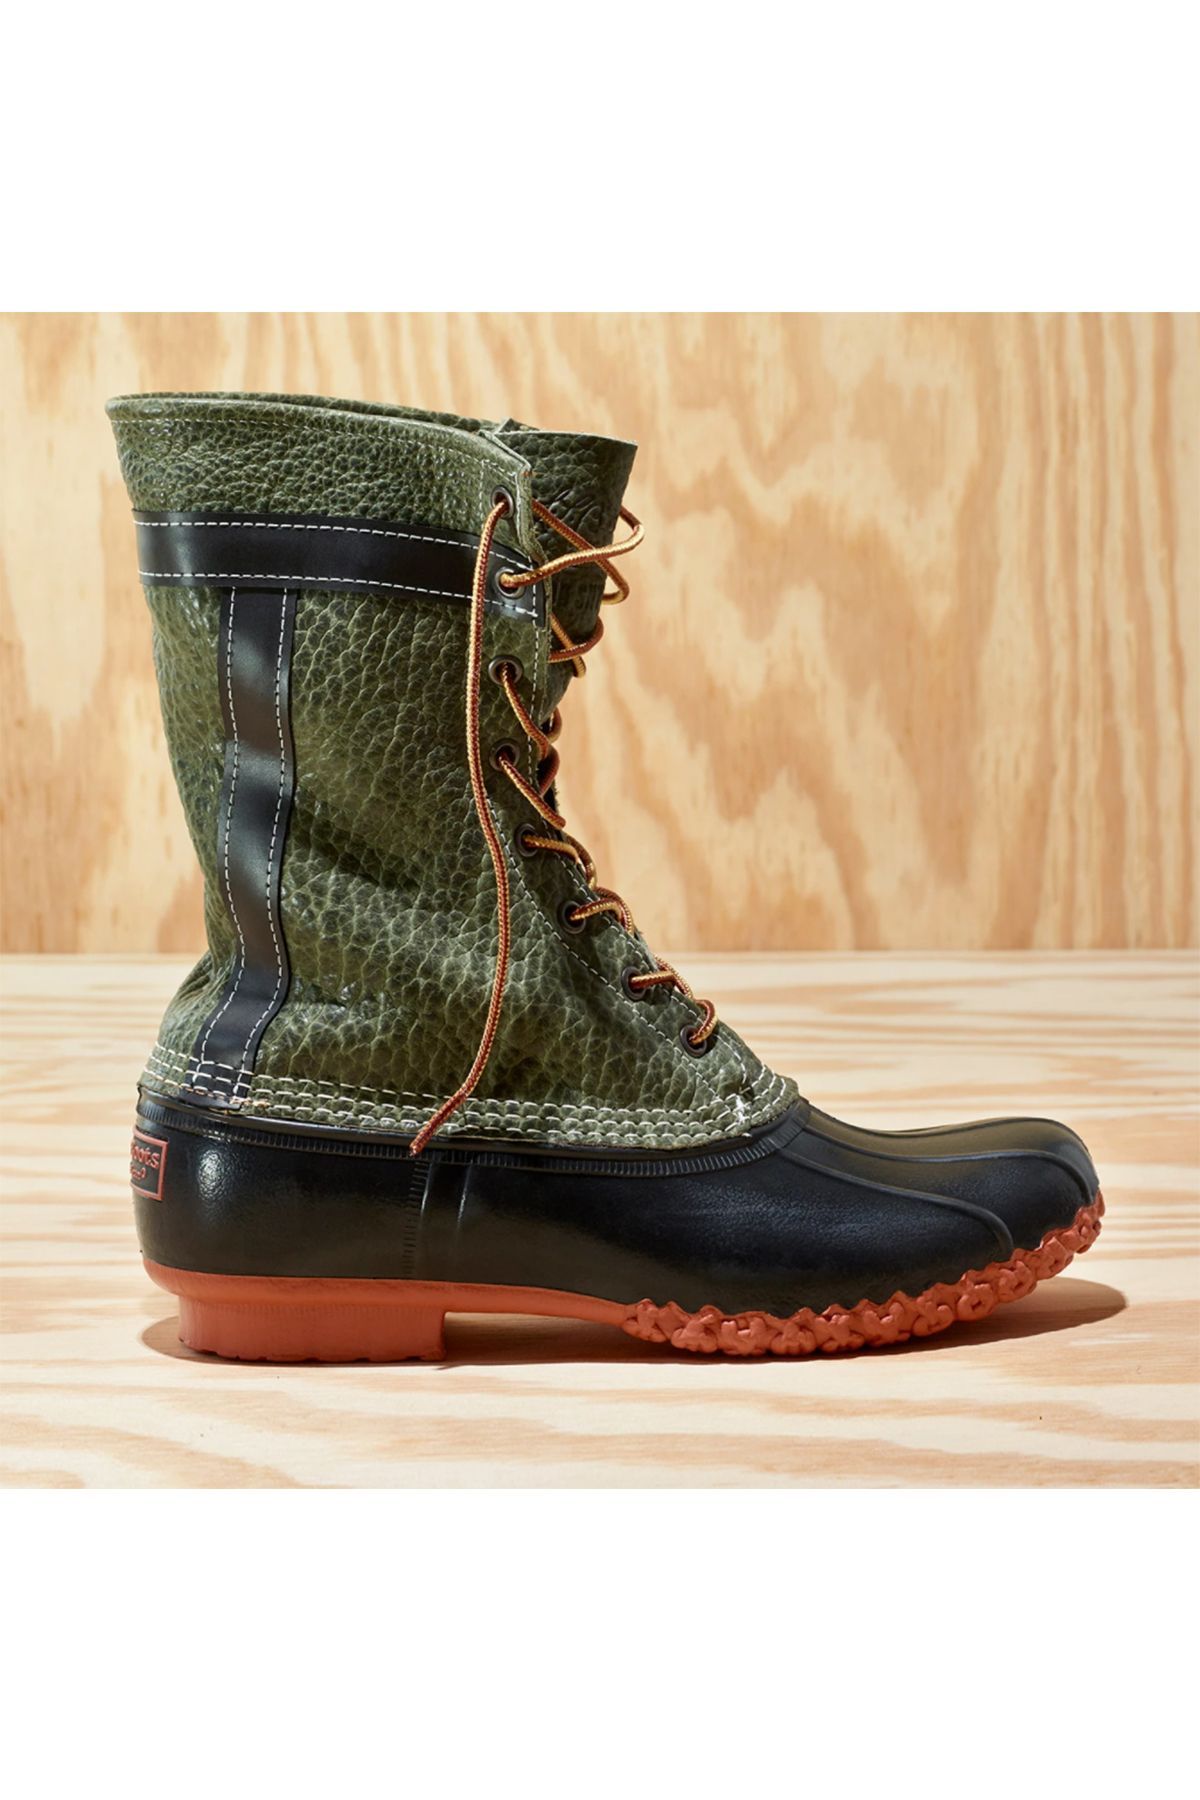 Bean Boot in Olive Bison Leather